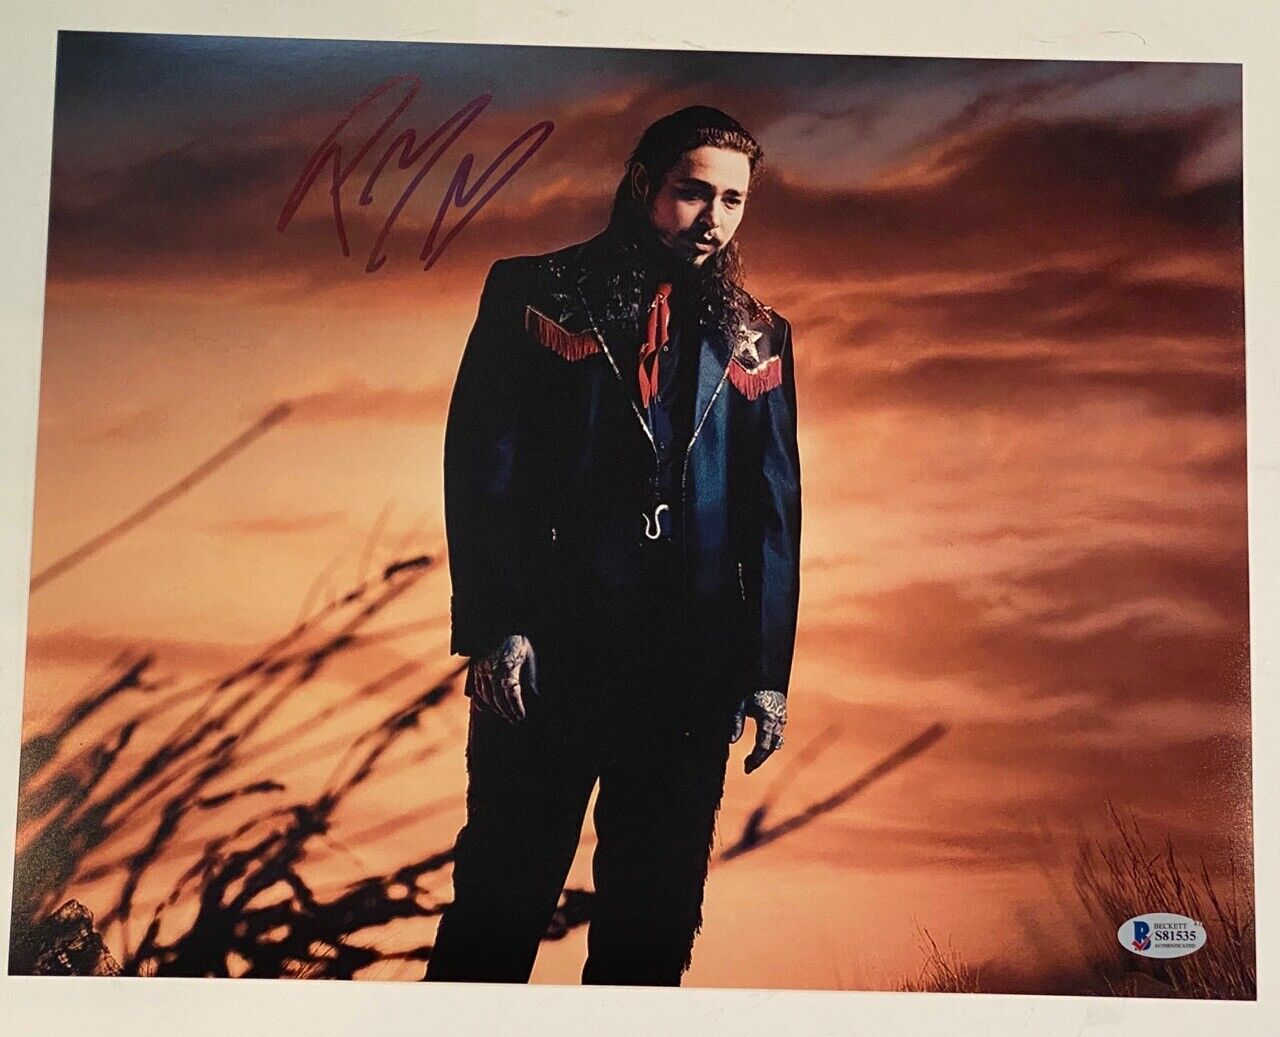 Post Malone Signed Autographed 11x14 Photo Poster painting Hollywood's Bleeding Beckett BAS COA